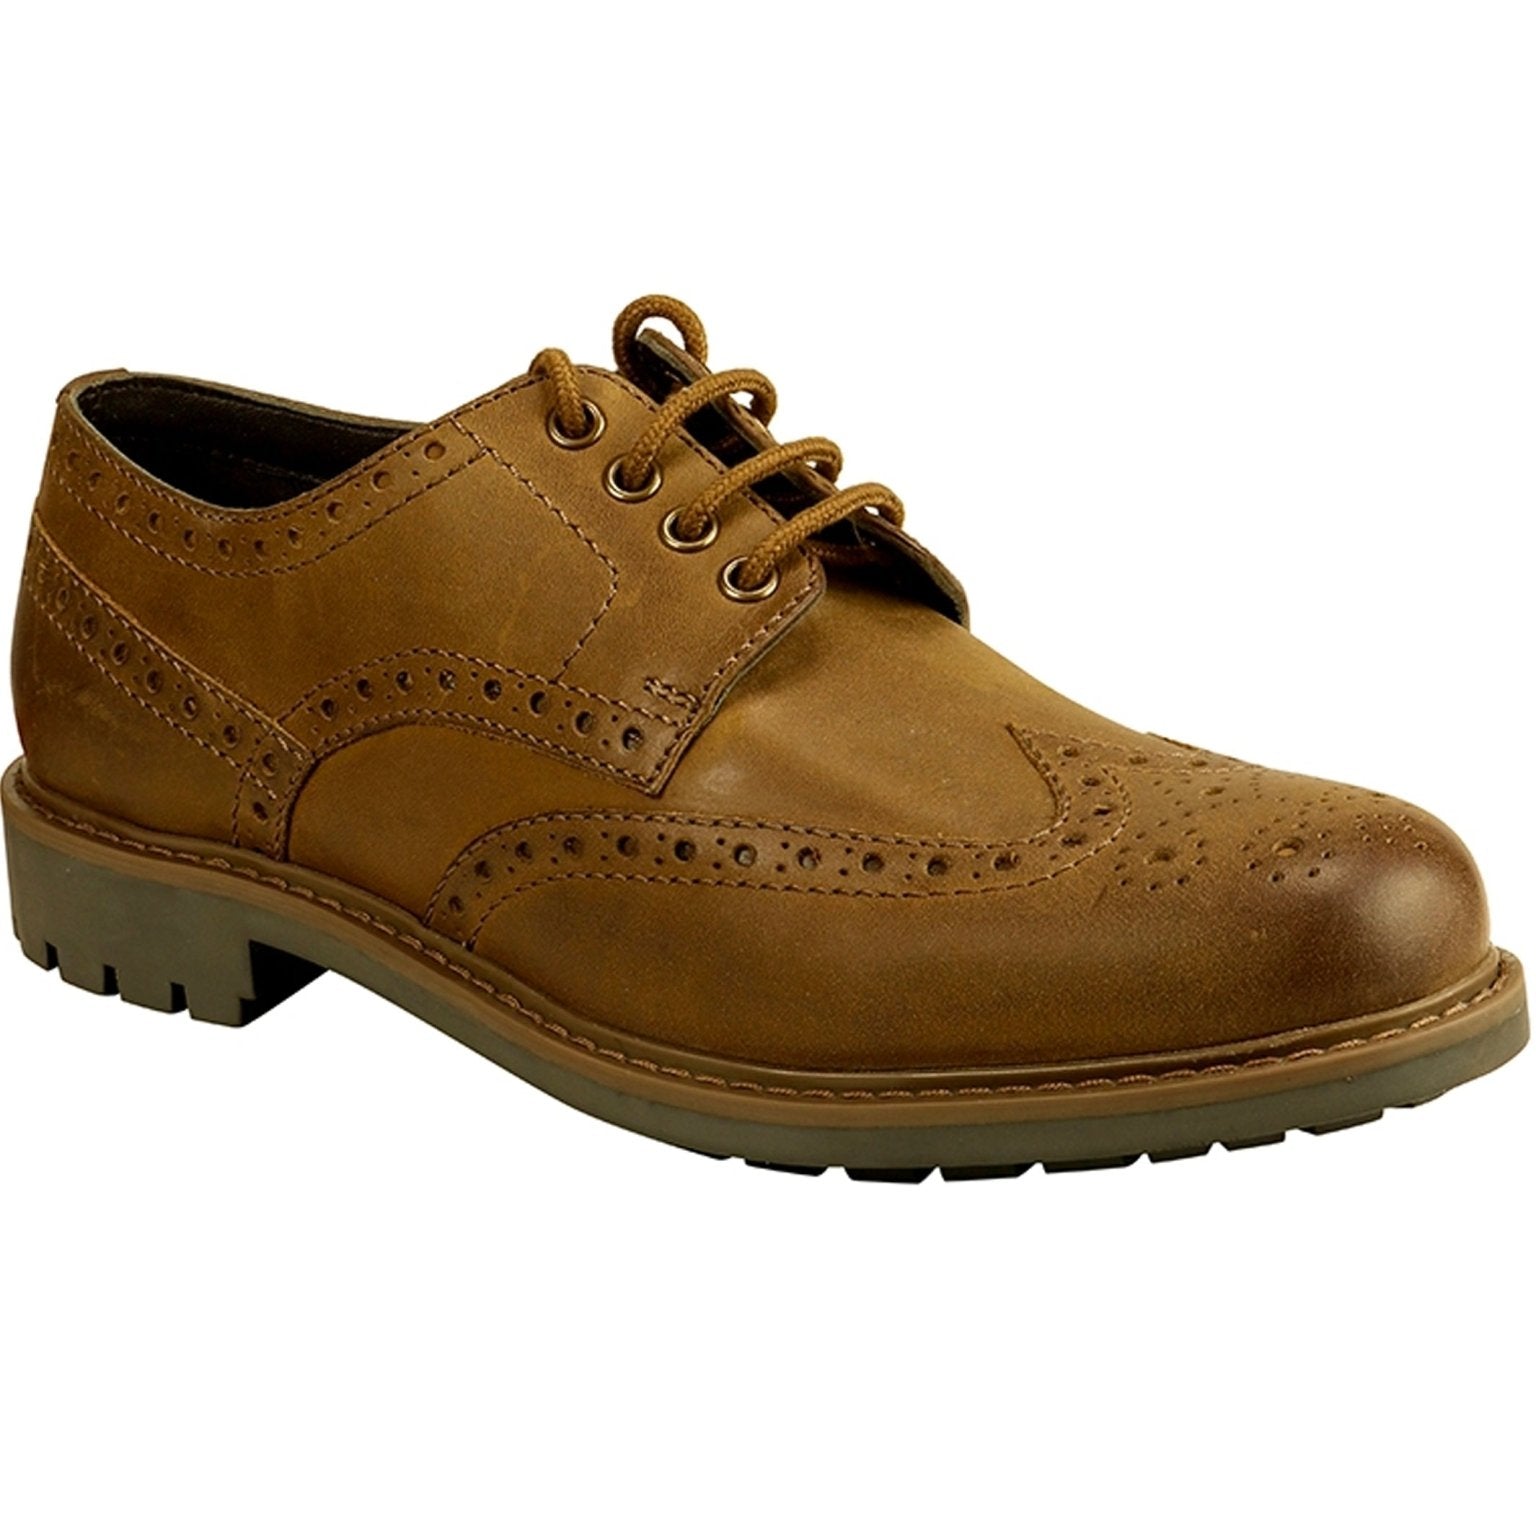 4elementsclothingHoggs of FifeHoggs of Fife - Mens Brogue Shoe - Inverurie Country Brogue Full grain leather shoeShoes4230/WA/40